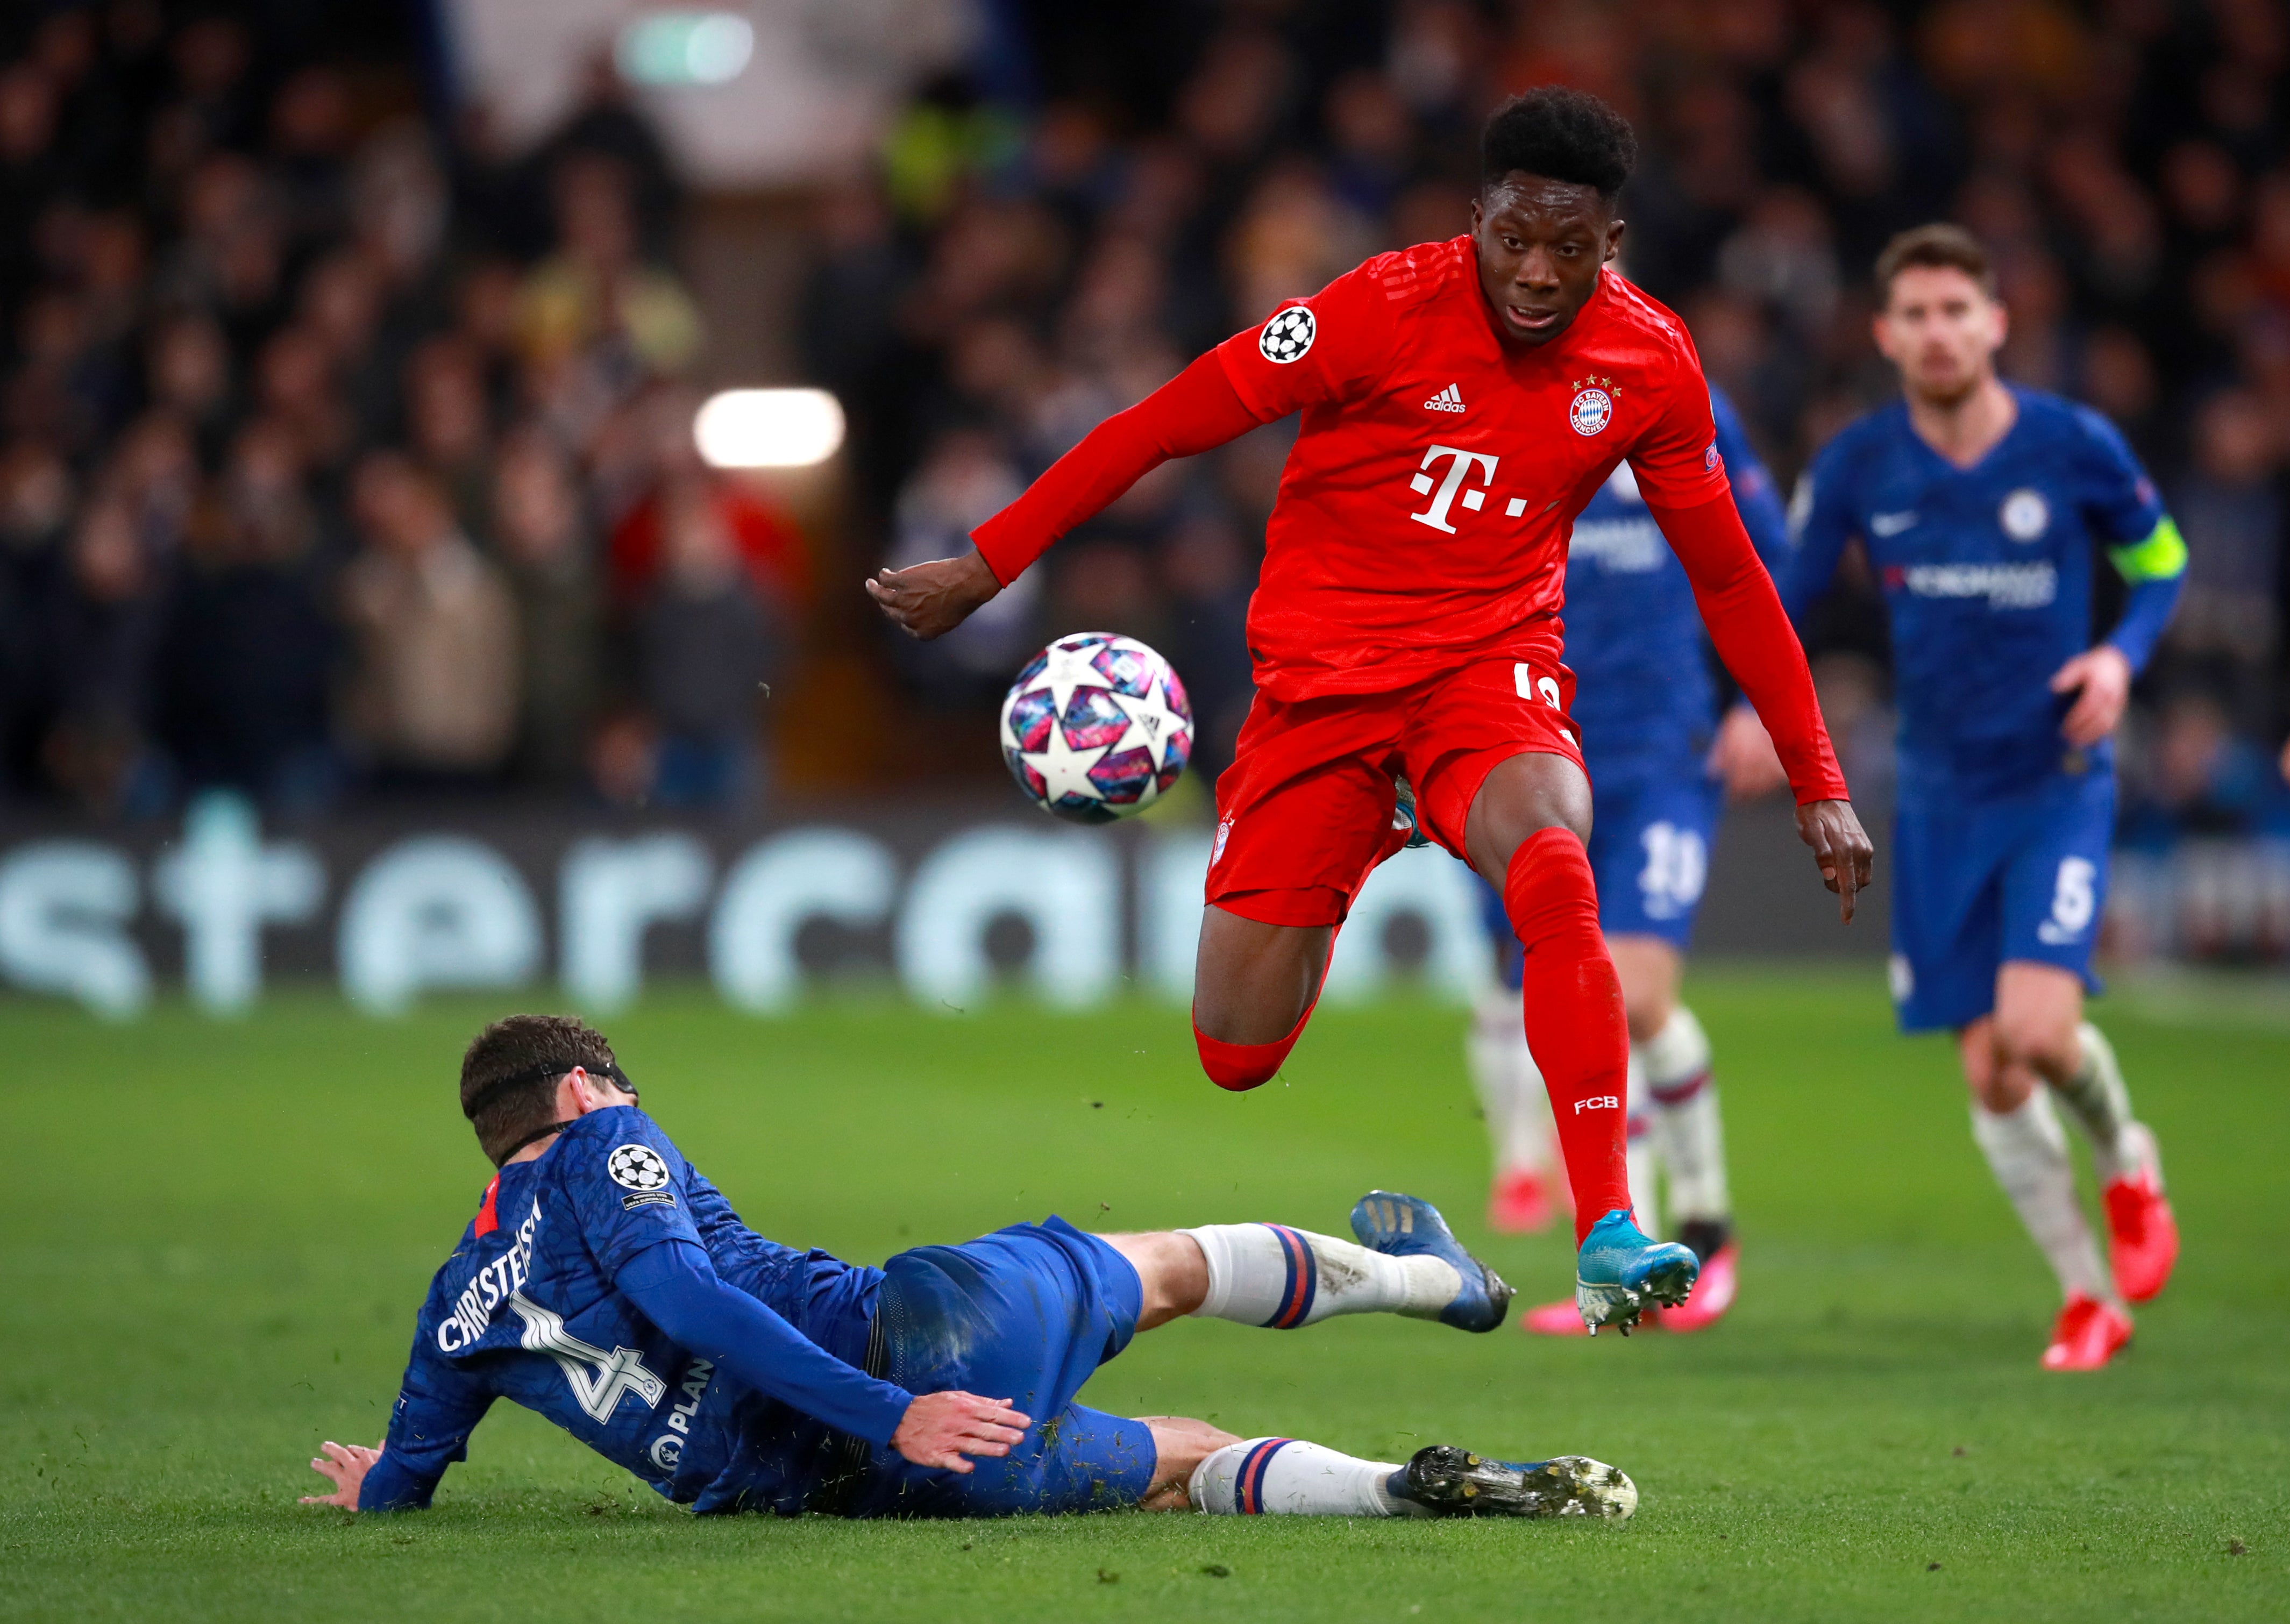 Alphonso Davies diagnosed with myocarditis after Covid-19 recovery